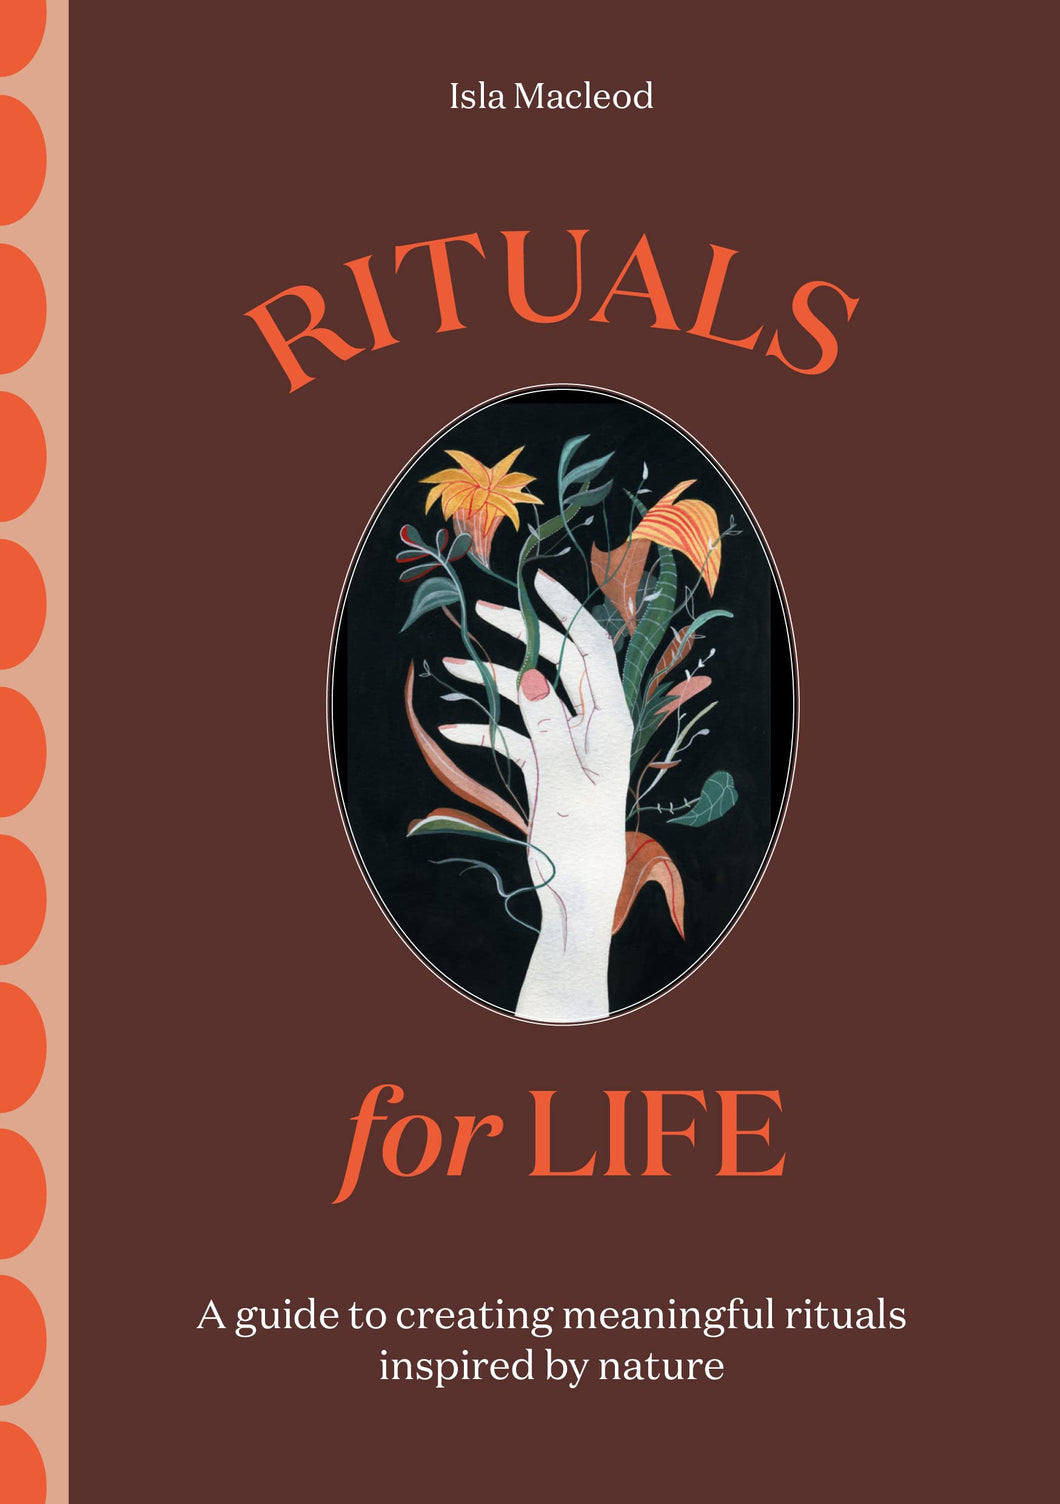 Rituals for Life: A Guide to Creating Meaningful Rituals Inspired by Nature [Isla Macleod]